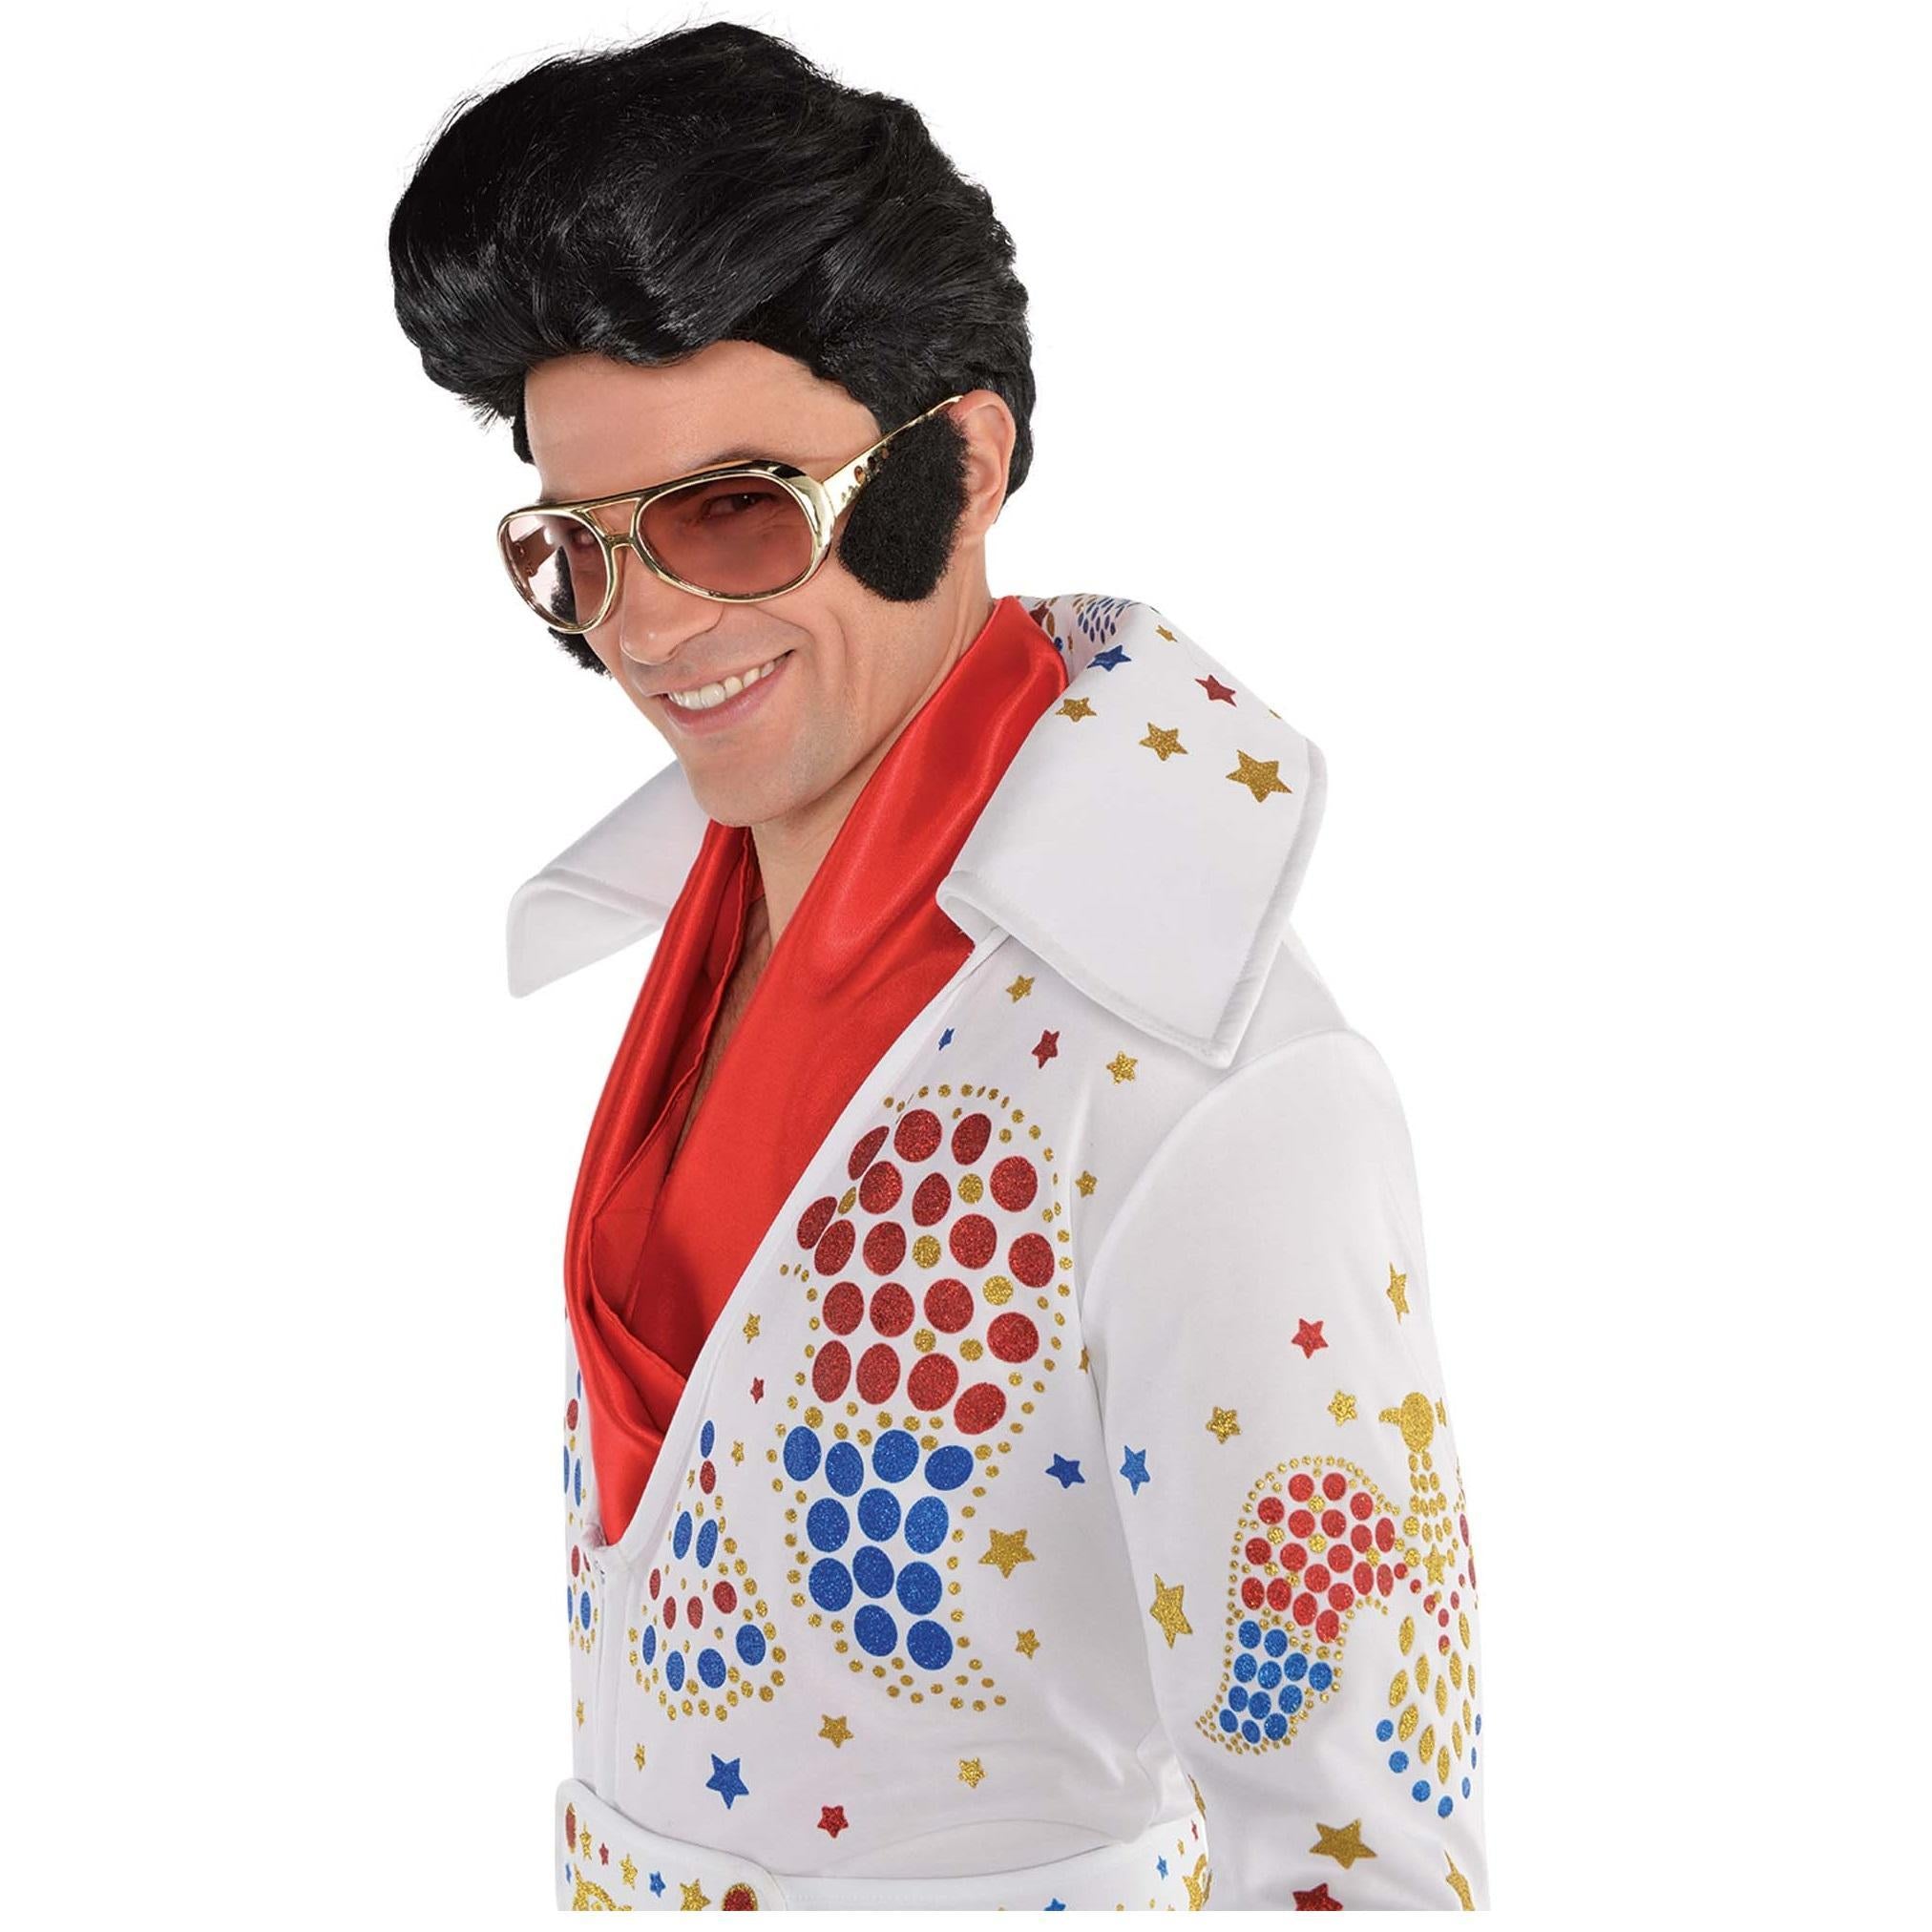 Adult Black Sideburns Costumes & Apparel - Party Centre - Party Centre